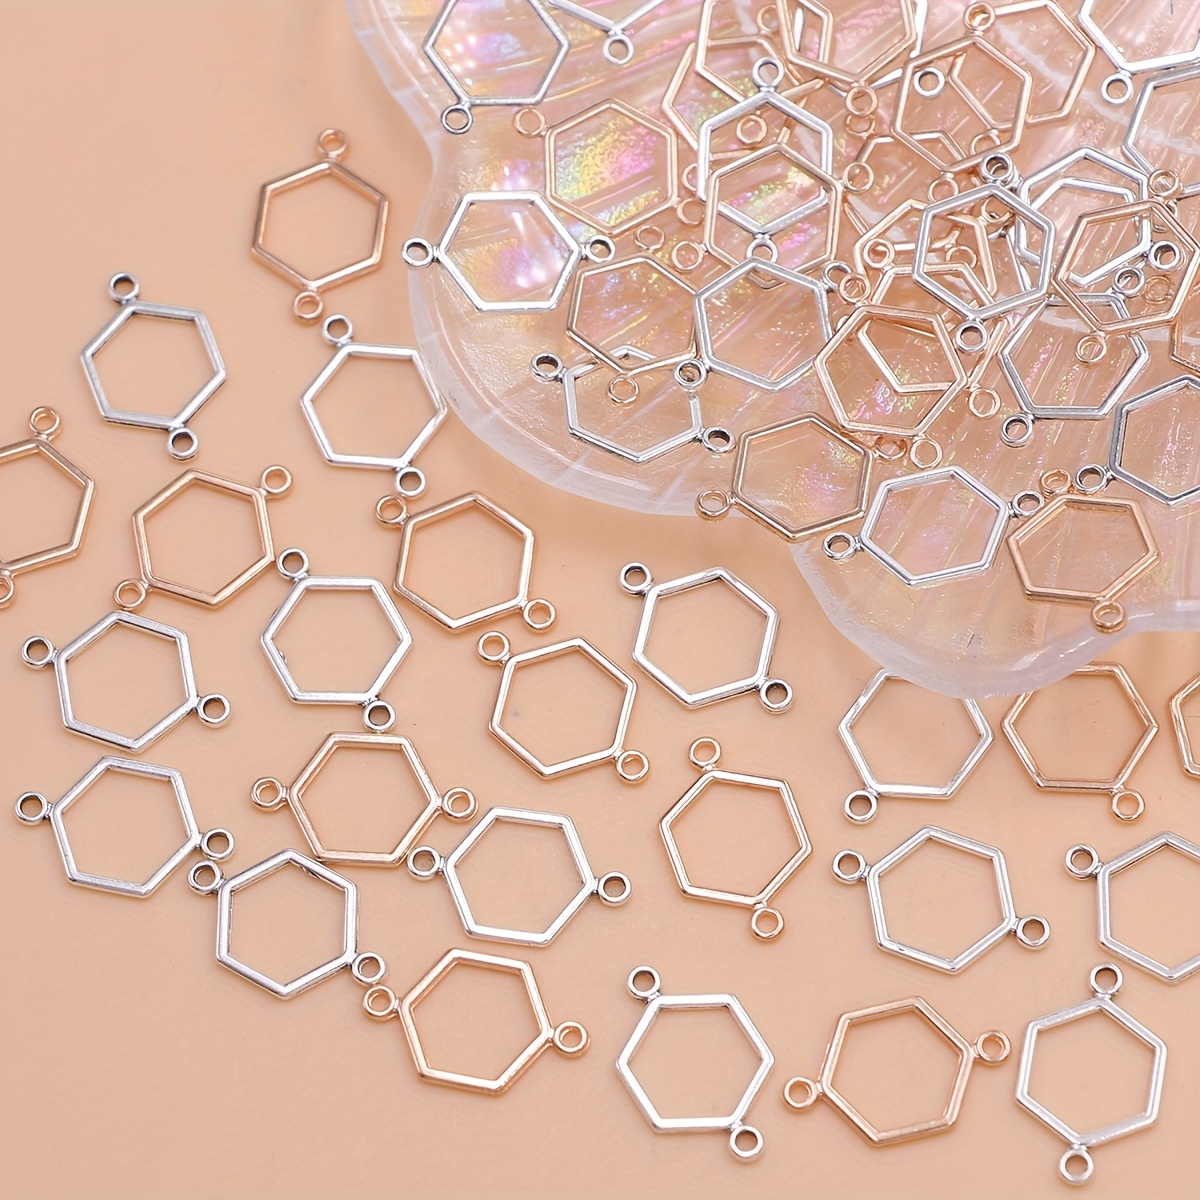 

30pcs Silver Plated Hexagon Charms Honeycomb Connectors Hollow Charms For Jewelry Making Diy Bracelet Earrings Accessories Small Business Supplies